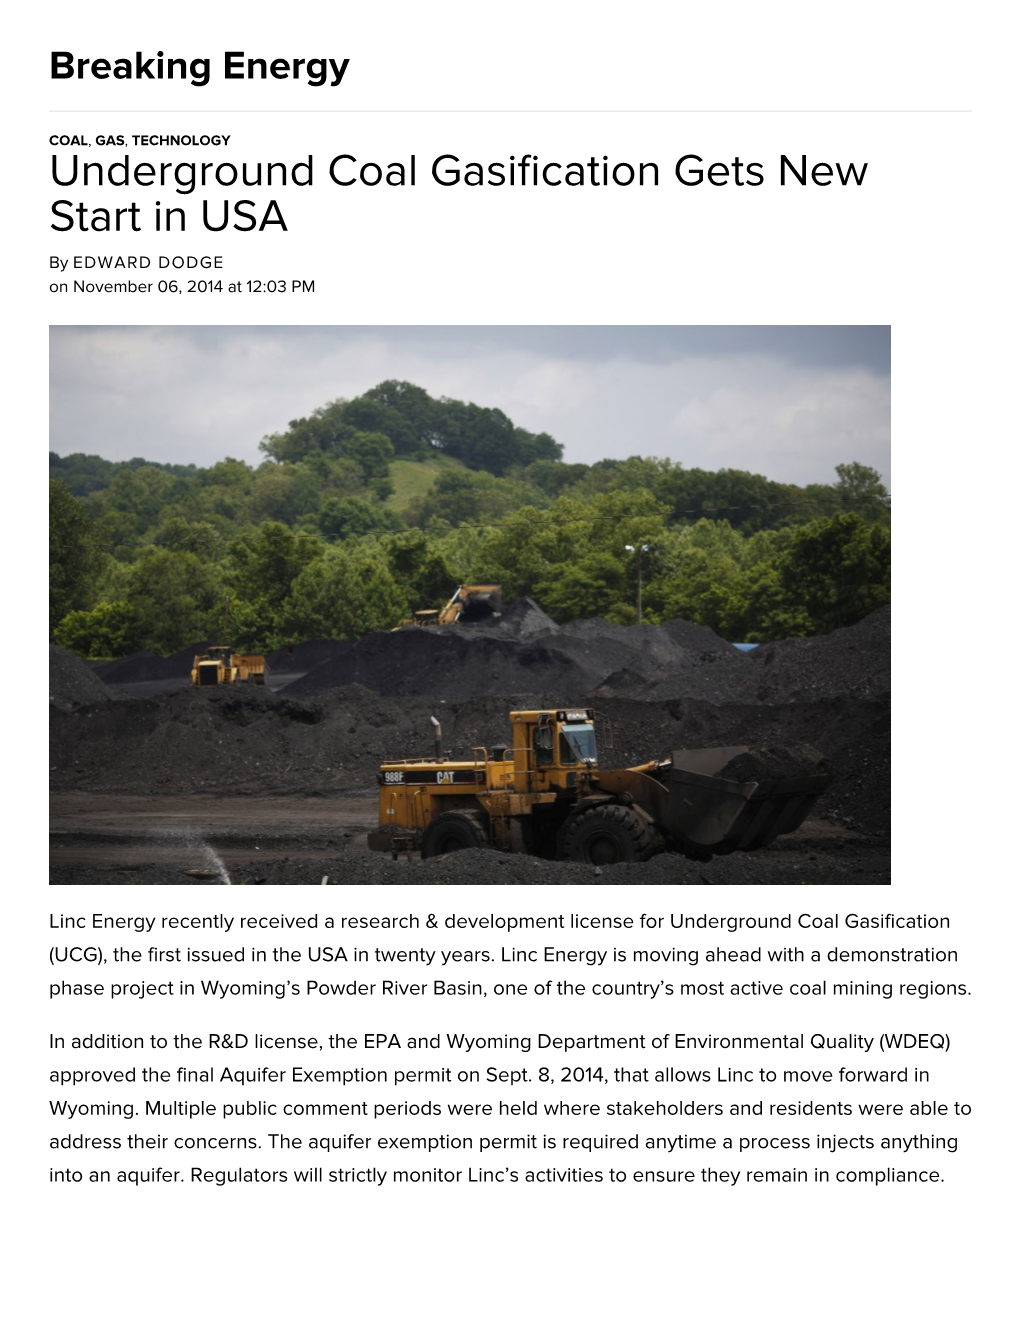 Underground Coal Gasification Gets New Start In